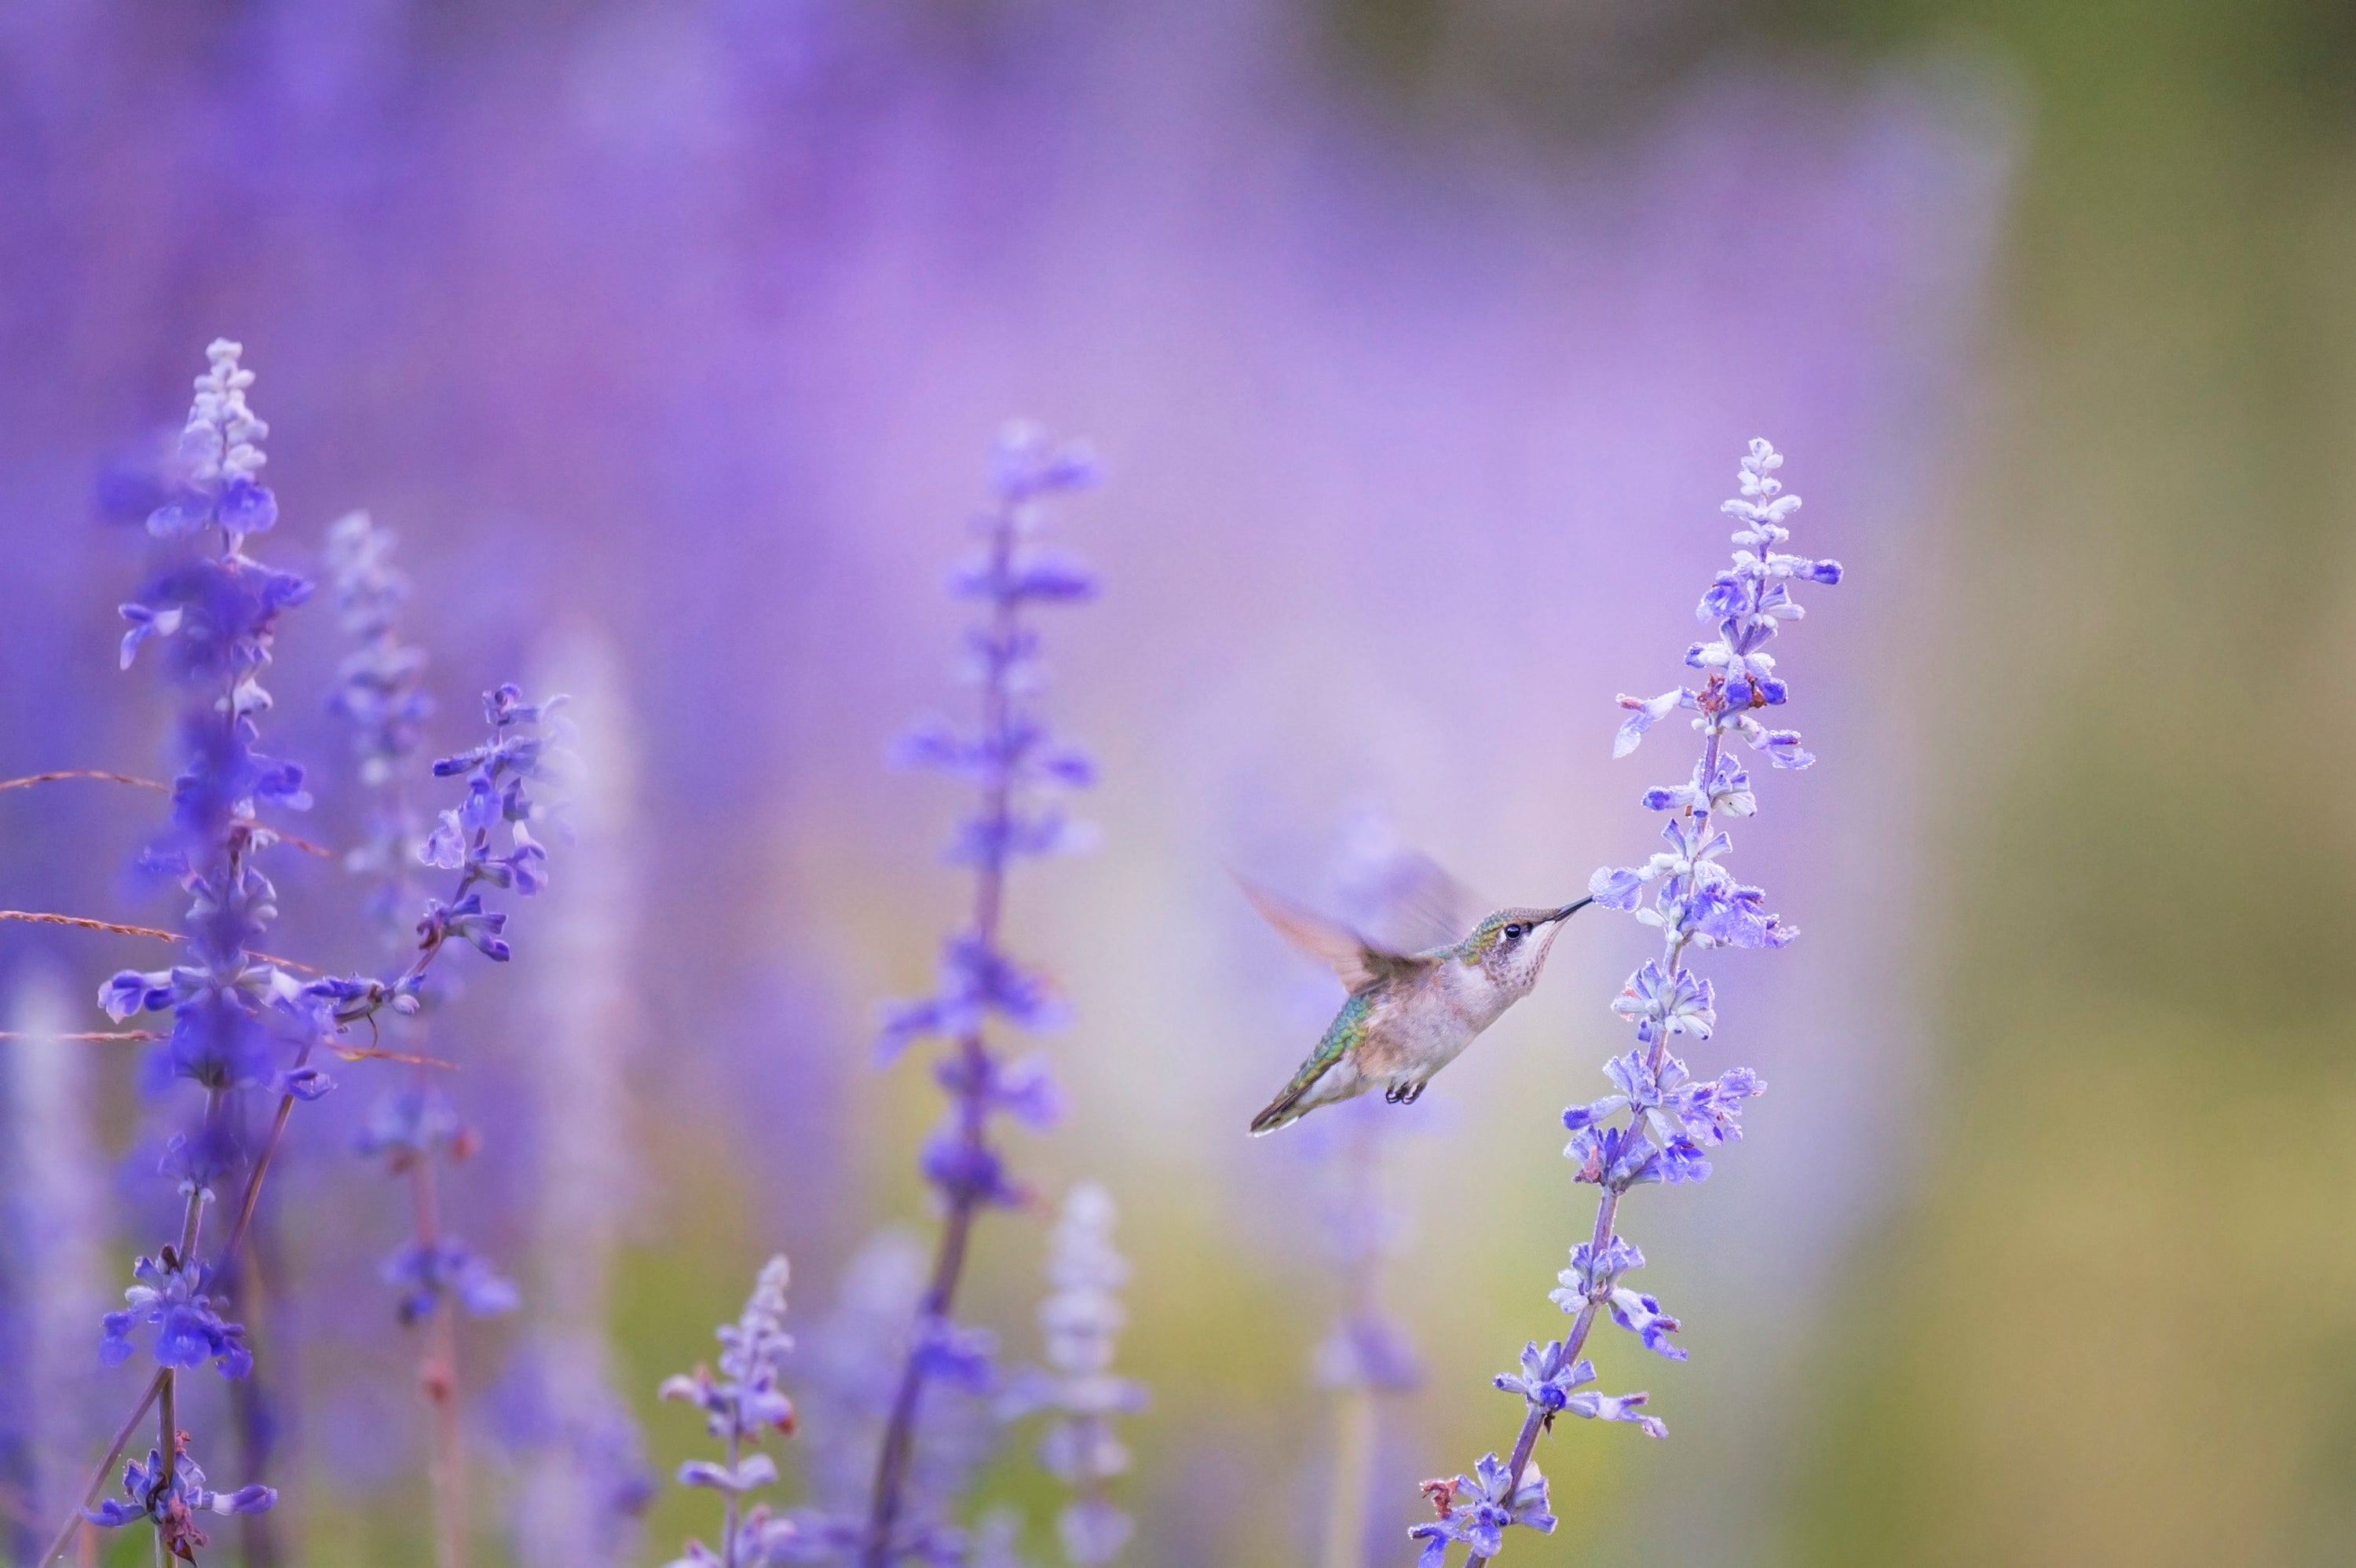 Bird savoring nectar from vibrant purple flowers, demonstrating the beauty of nature's symbiotic relationship between birds and flowering plants.